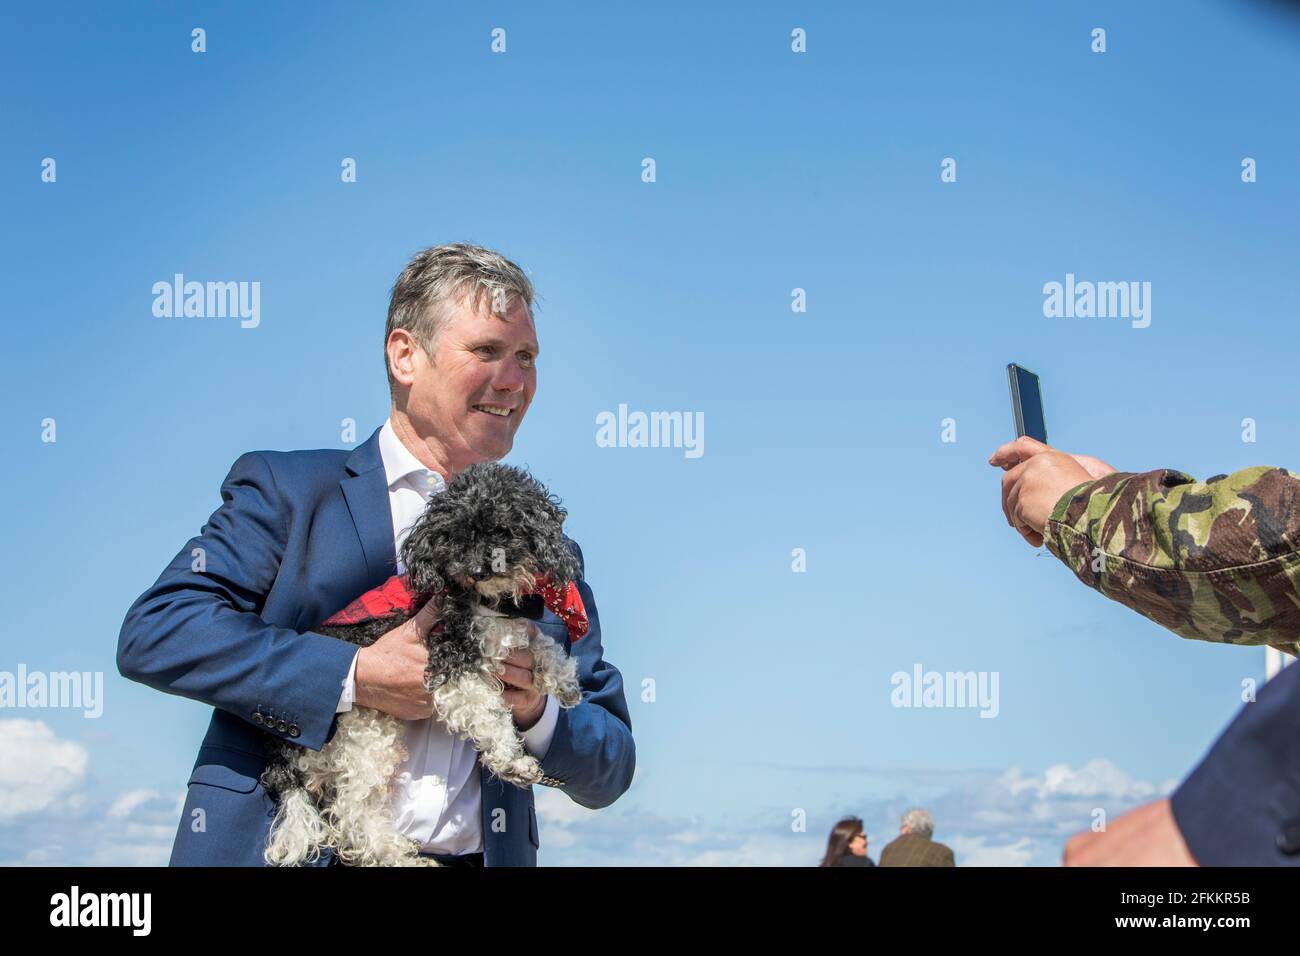 Sir Keir Starmer and Labour Candidate Dr Paul Williams canvassing with Angela Rayner MP during the Hartlepool Bye Election in Seaton Carew.  Sir Keir is holding Tommy Arnells dog 'Stig'. Stock Photo